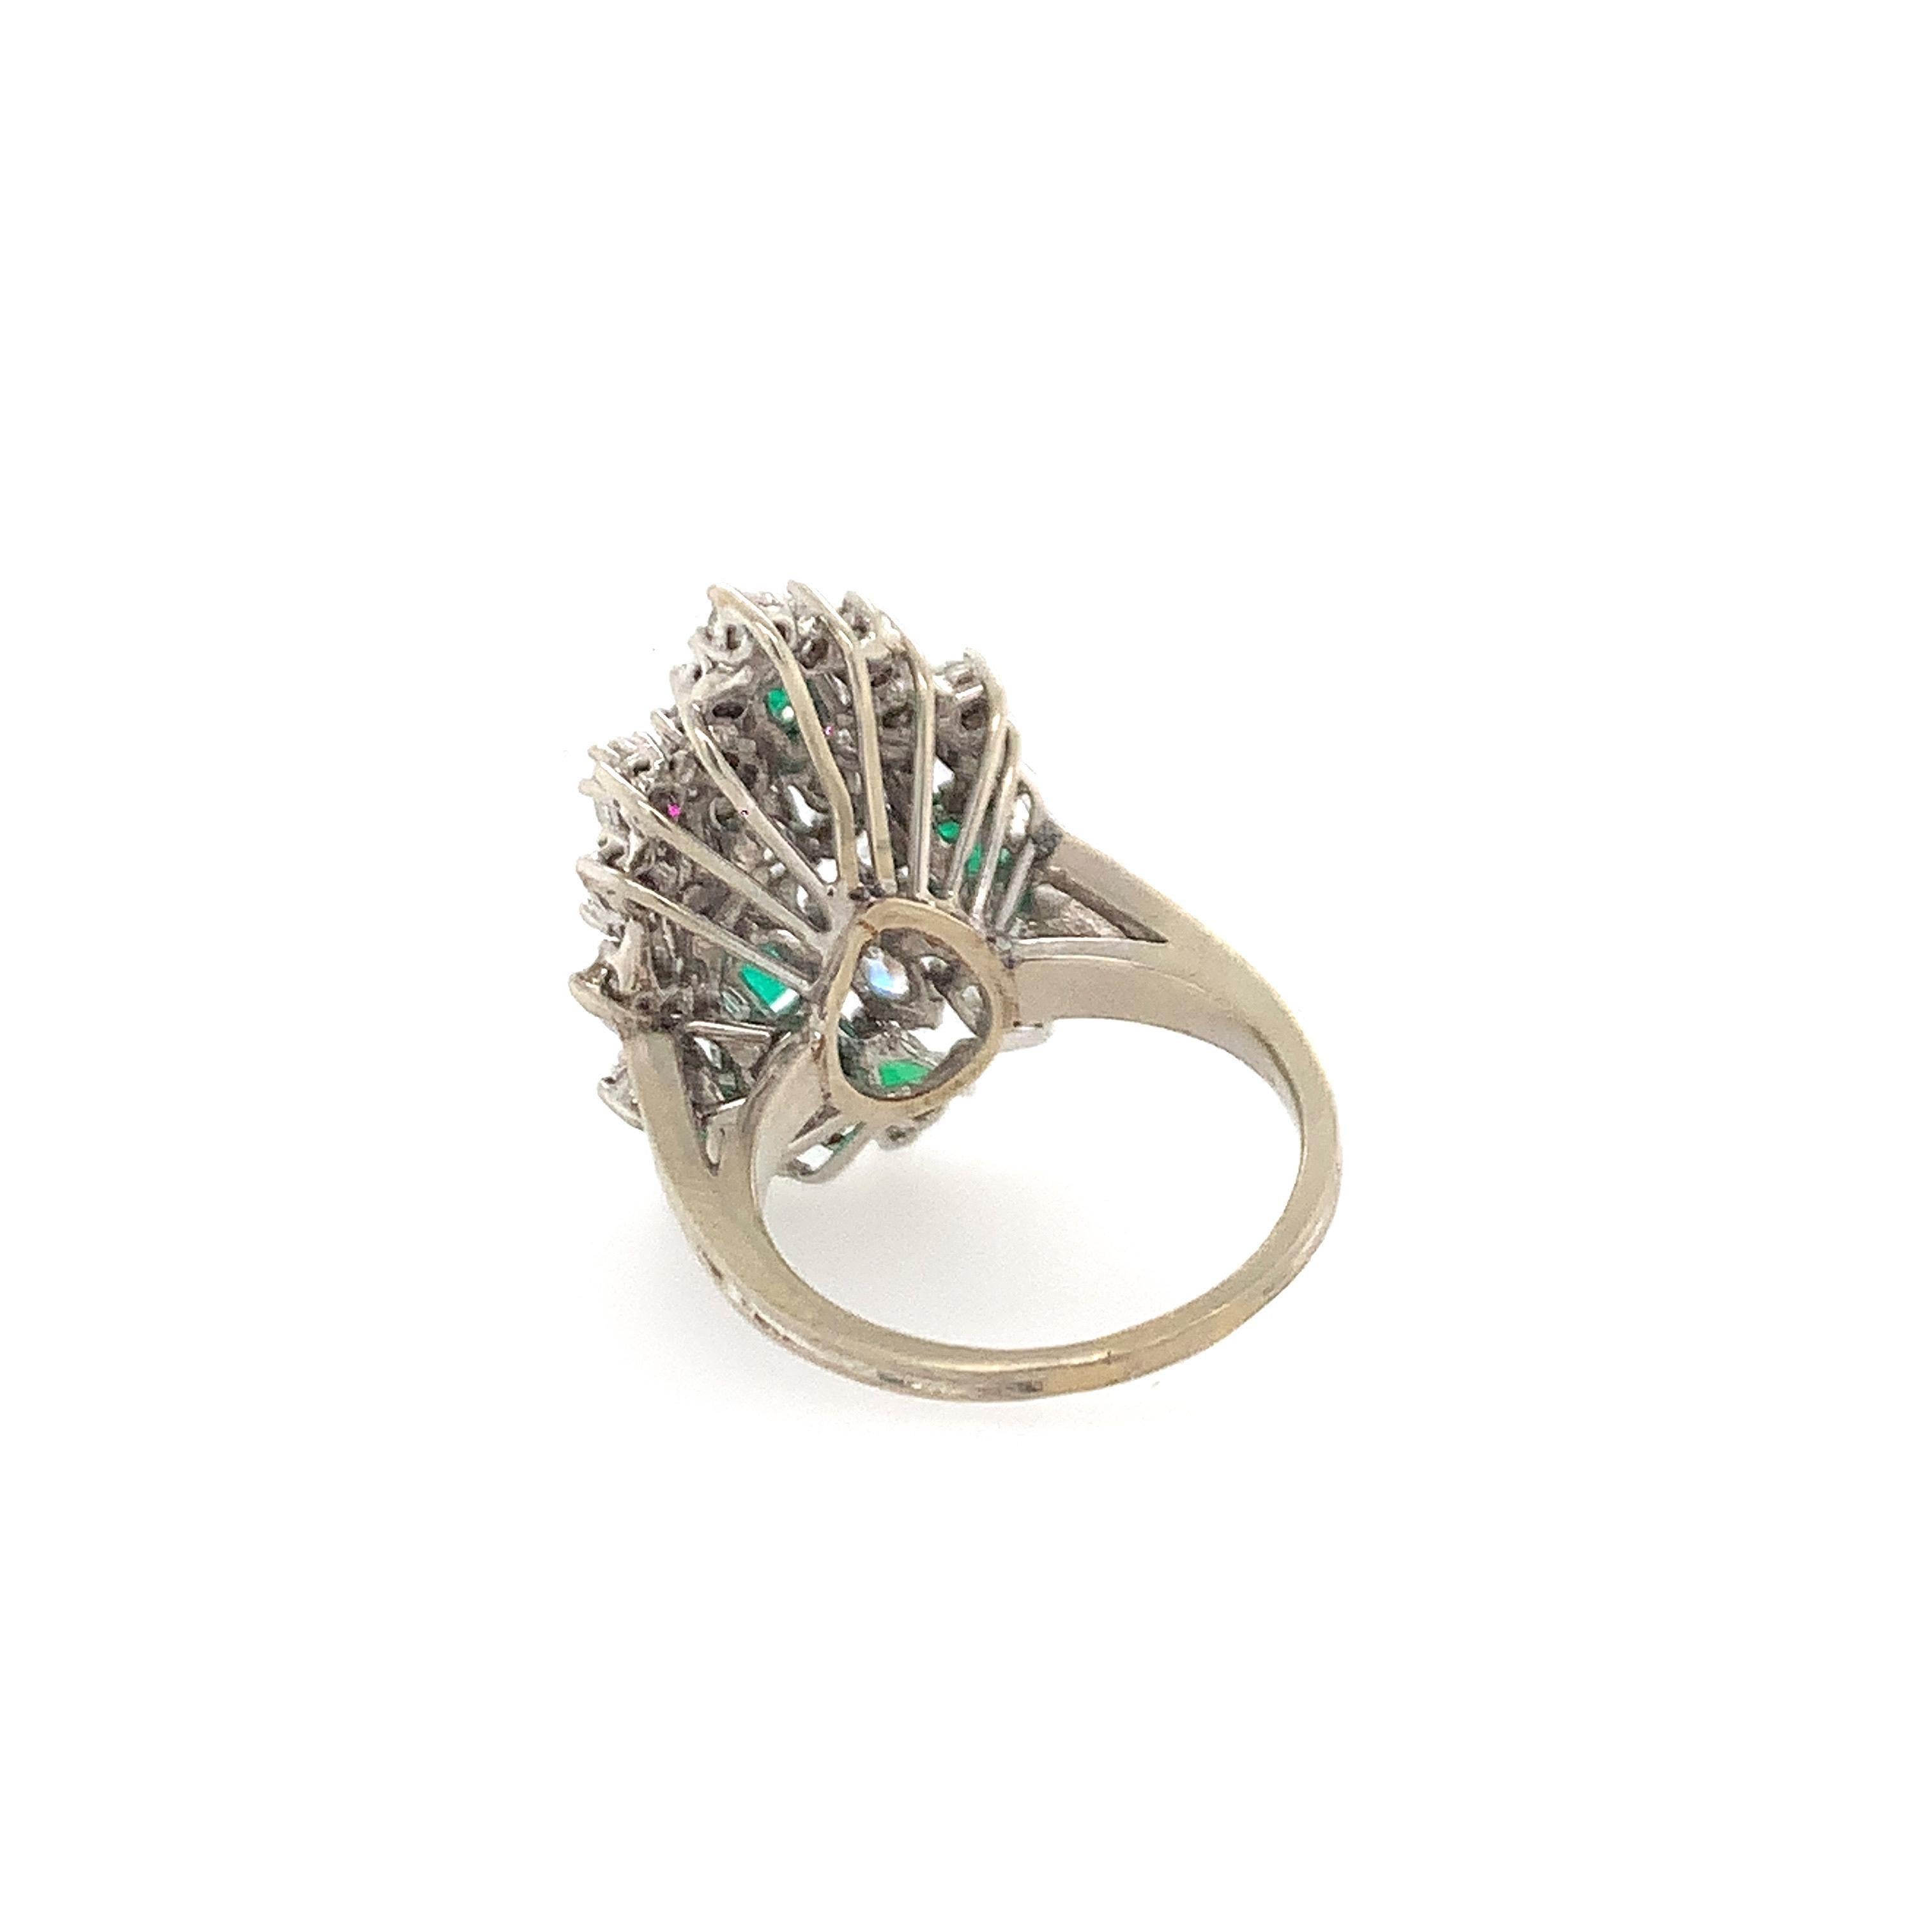 14K W/gold multi-shaped diamonds and emeralds.  Diamonds weighing approx. 3.00 cts, JK VS-SI emerald weighing approx. 1 ct, to of ring meausres 1 1/2 inches, weight 6.4 dwt